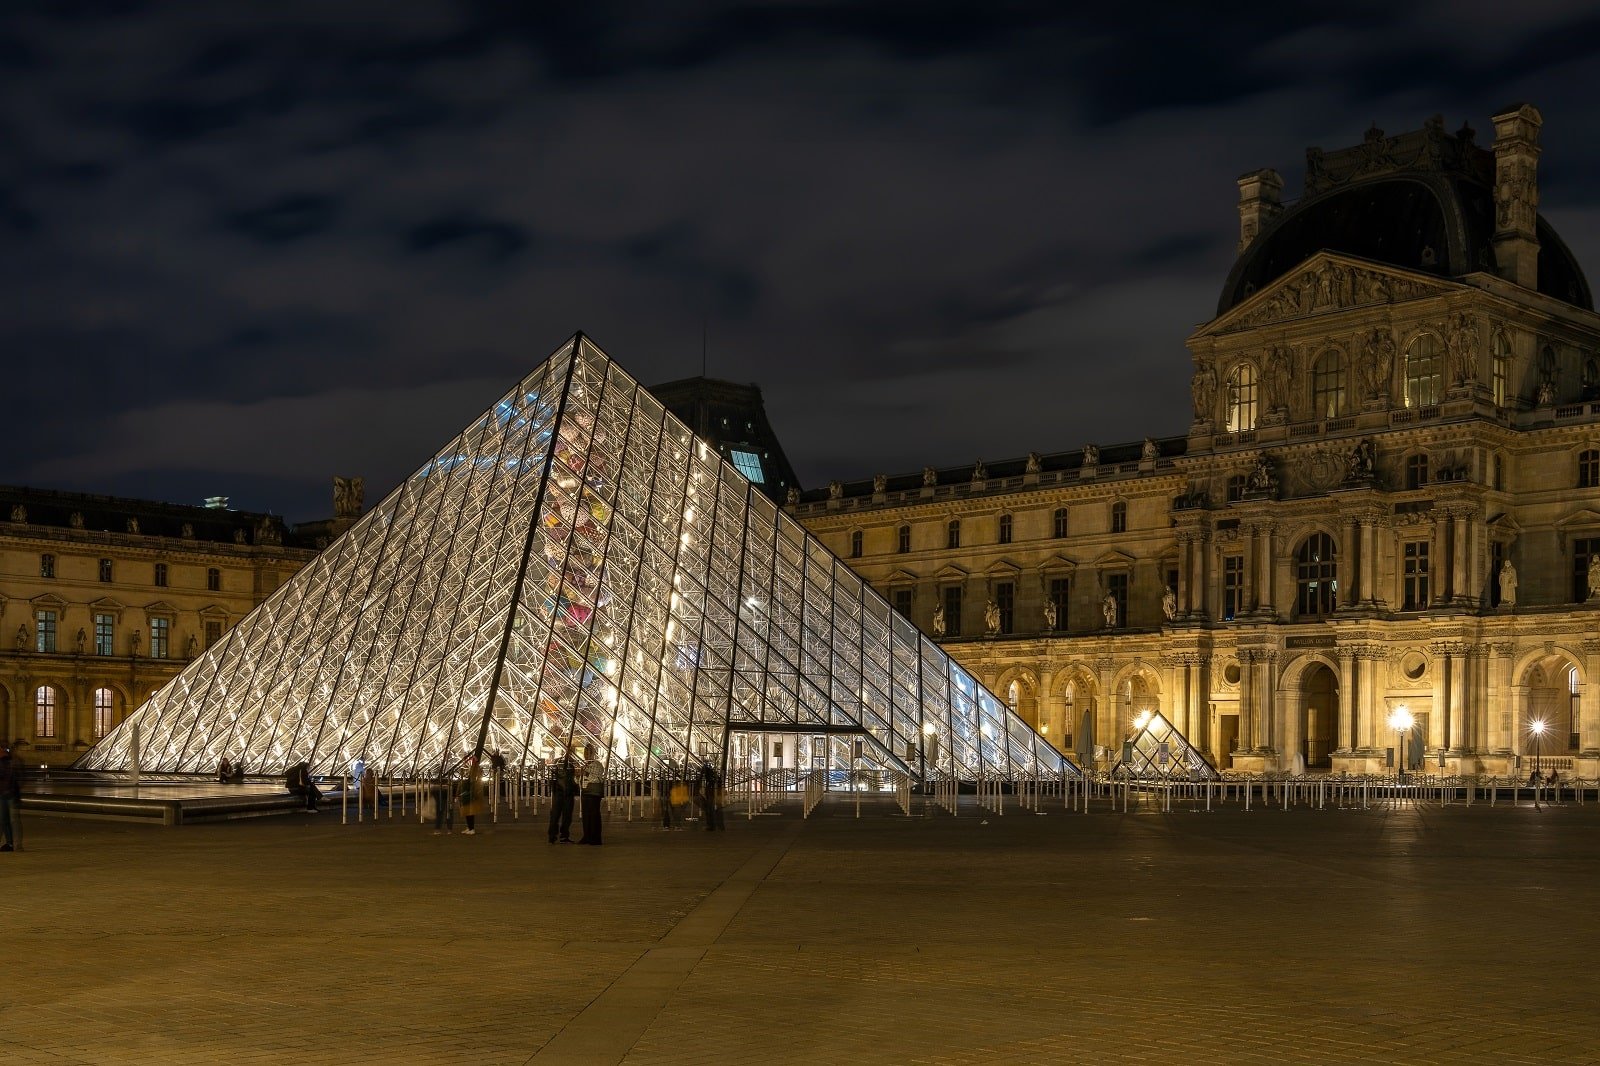 <p><span>Begin your art journey at the iconic Louvre in Paris, the world’s largest art museum and a historic monument in France. Famous for housing the Mona Lisa and the Venus de Milo, the Louvre’s collection spans from ancient civilizations to mid-19th-century European art. Its glass pyramid entrance is a landmark in itself. Navigating this vast museum can be daunting, so focus on key sections or artworks that interest you most. The Louvre is divided into three wings: Denon, Sully, and Richelieu, each offering a unique array of art and historical objects.</span></p> <p><b>Insider’s Tip: </b><span>Buy tickets online to avoid long entry lines. </span></p> <p><b>When To Travel: </b><span>Visit in the off-season (November to March) for fewer crowds. </span></p> <p><b>How To Get There: </b><span>Accessible via the Palais Royal – Musée du Louvre metro station.</span></p>